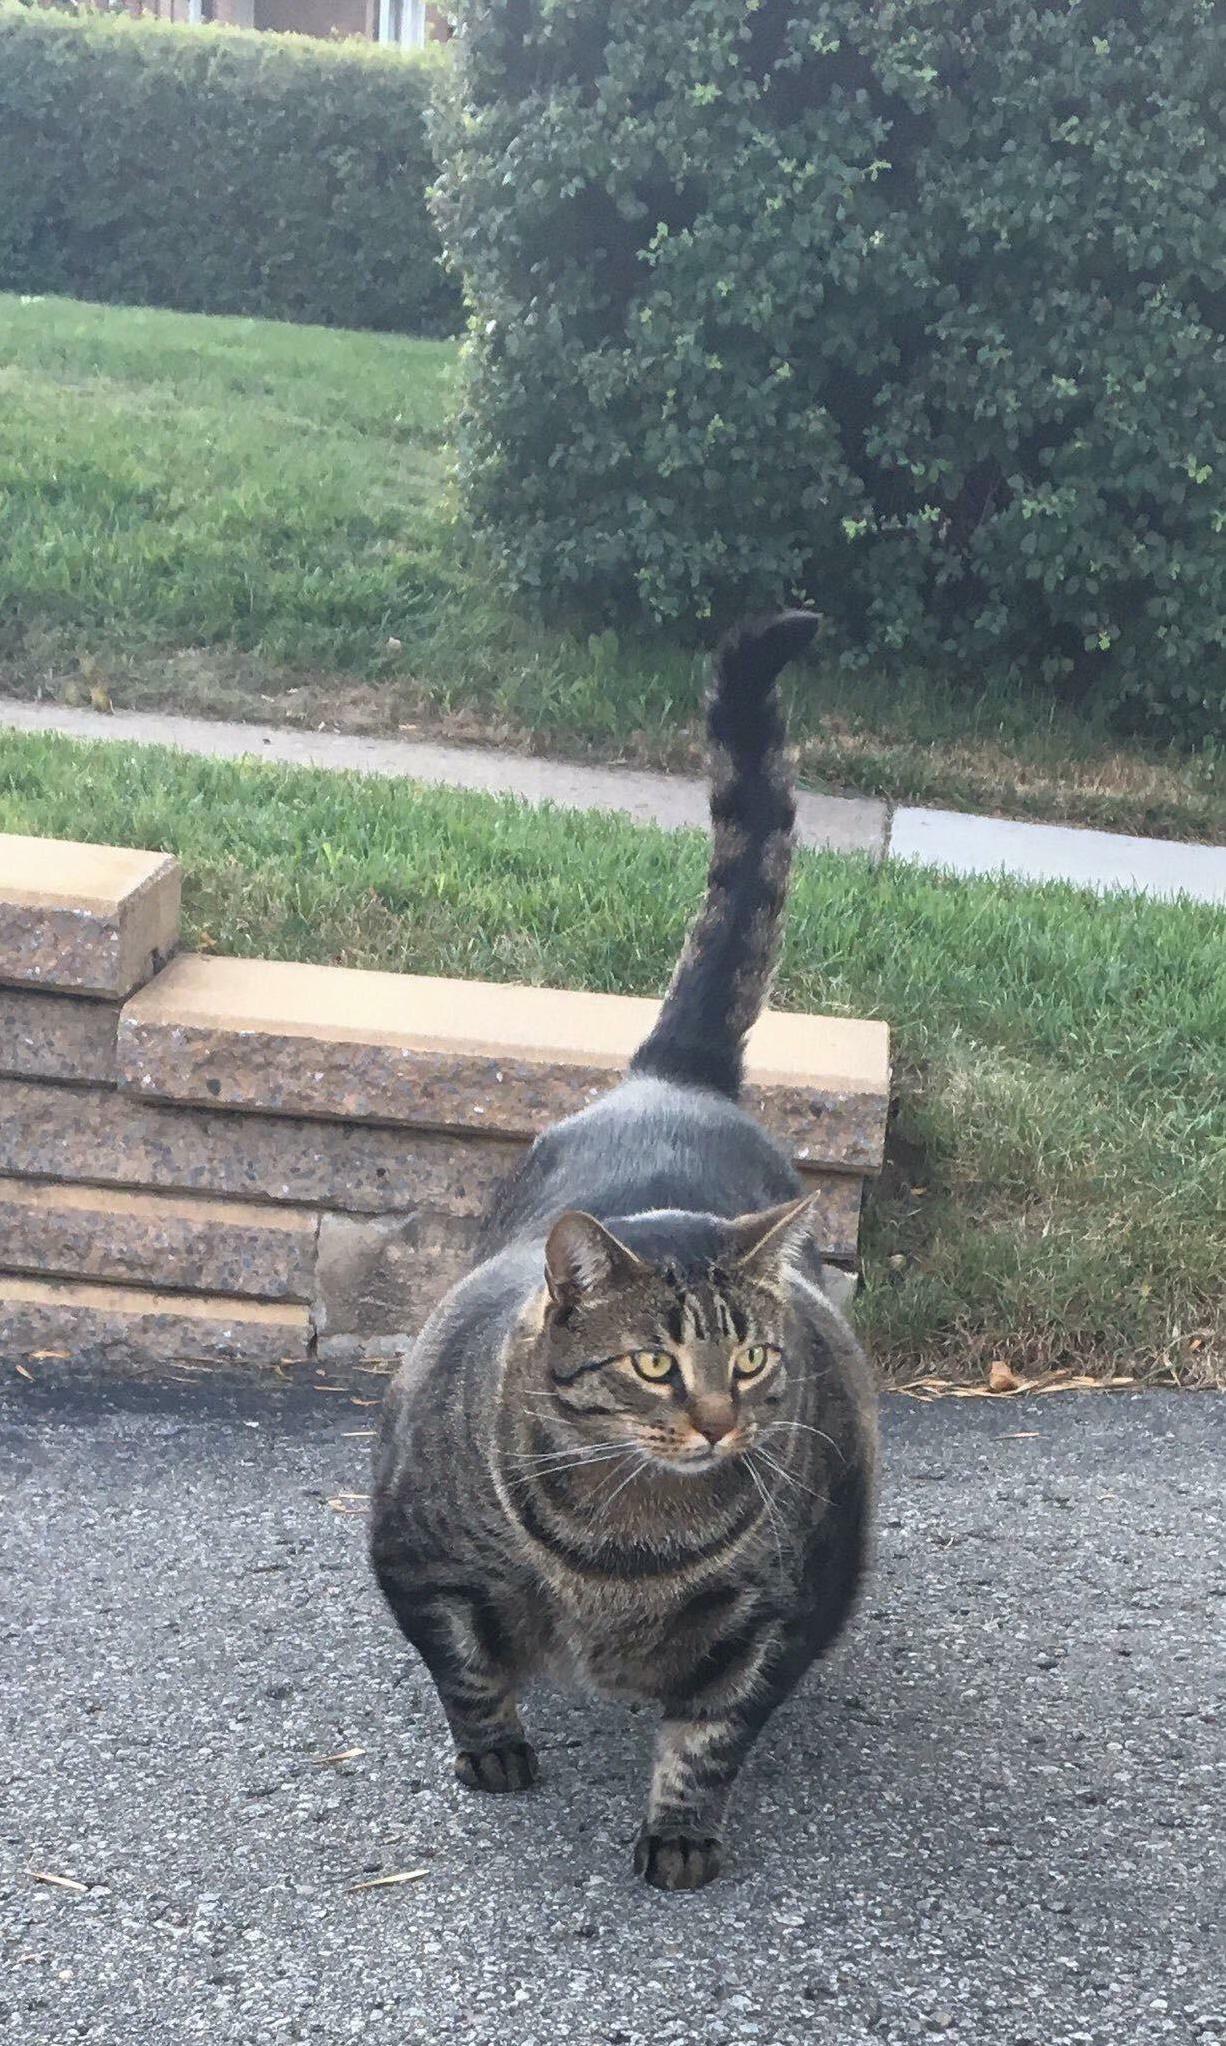 Swolcat has arrived